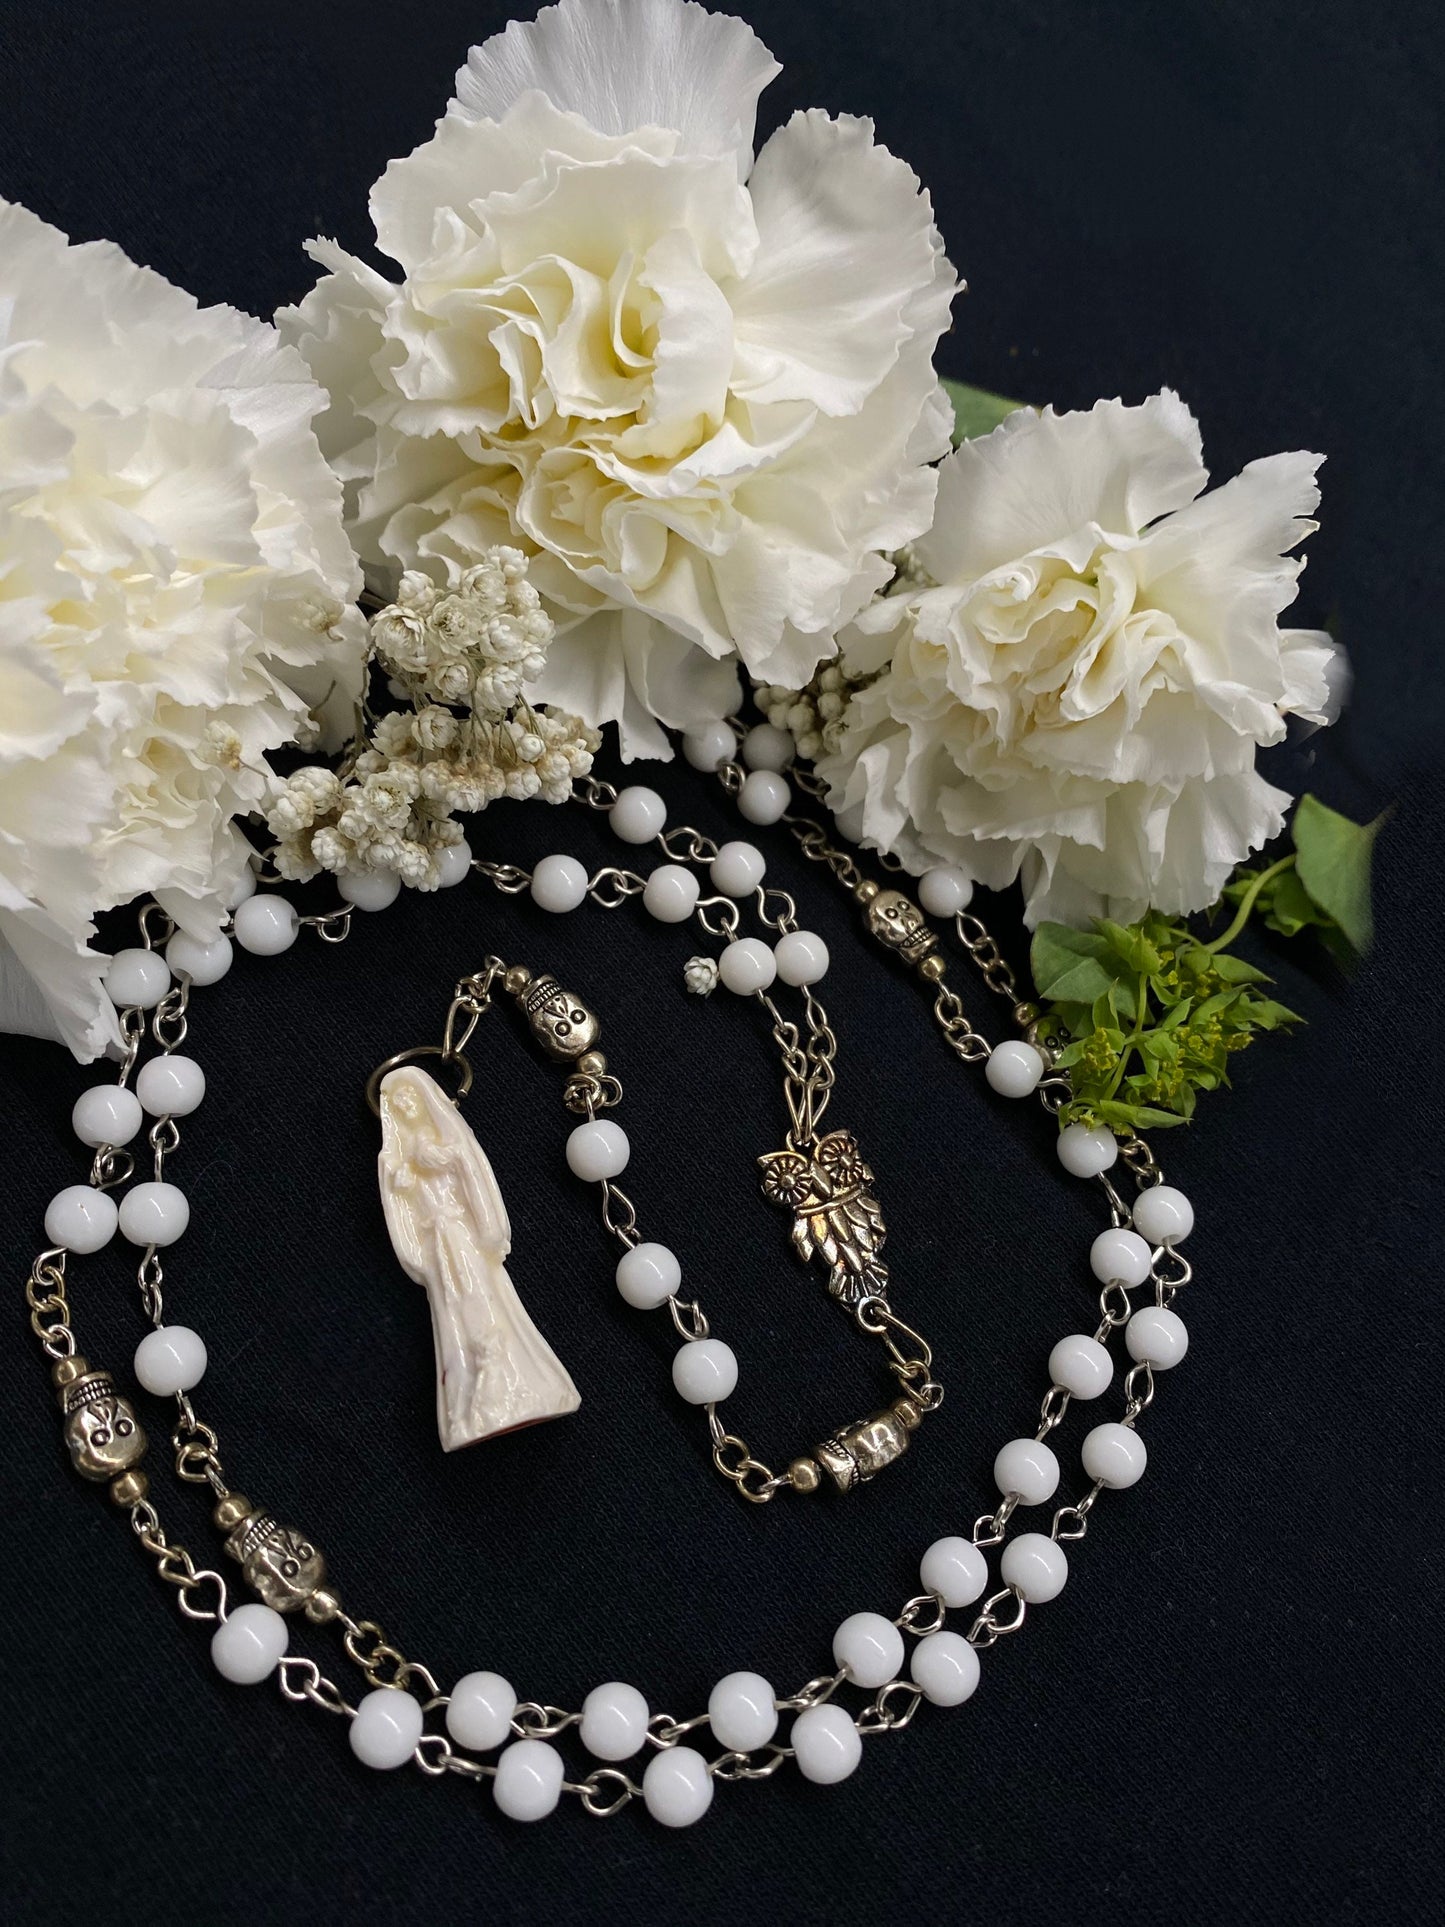 Santa Muerte Blanca Rosary + Gemstone + Blessed + Sterling Silver Plated Chain + Handcrafted + Rosario